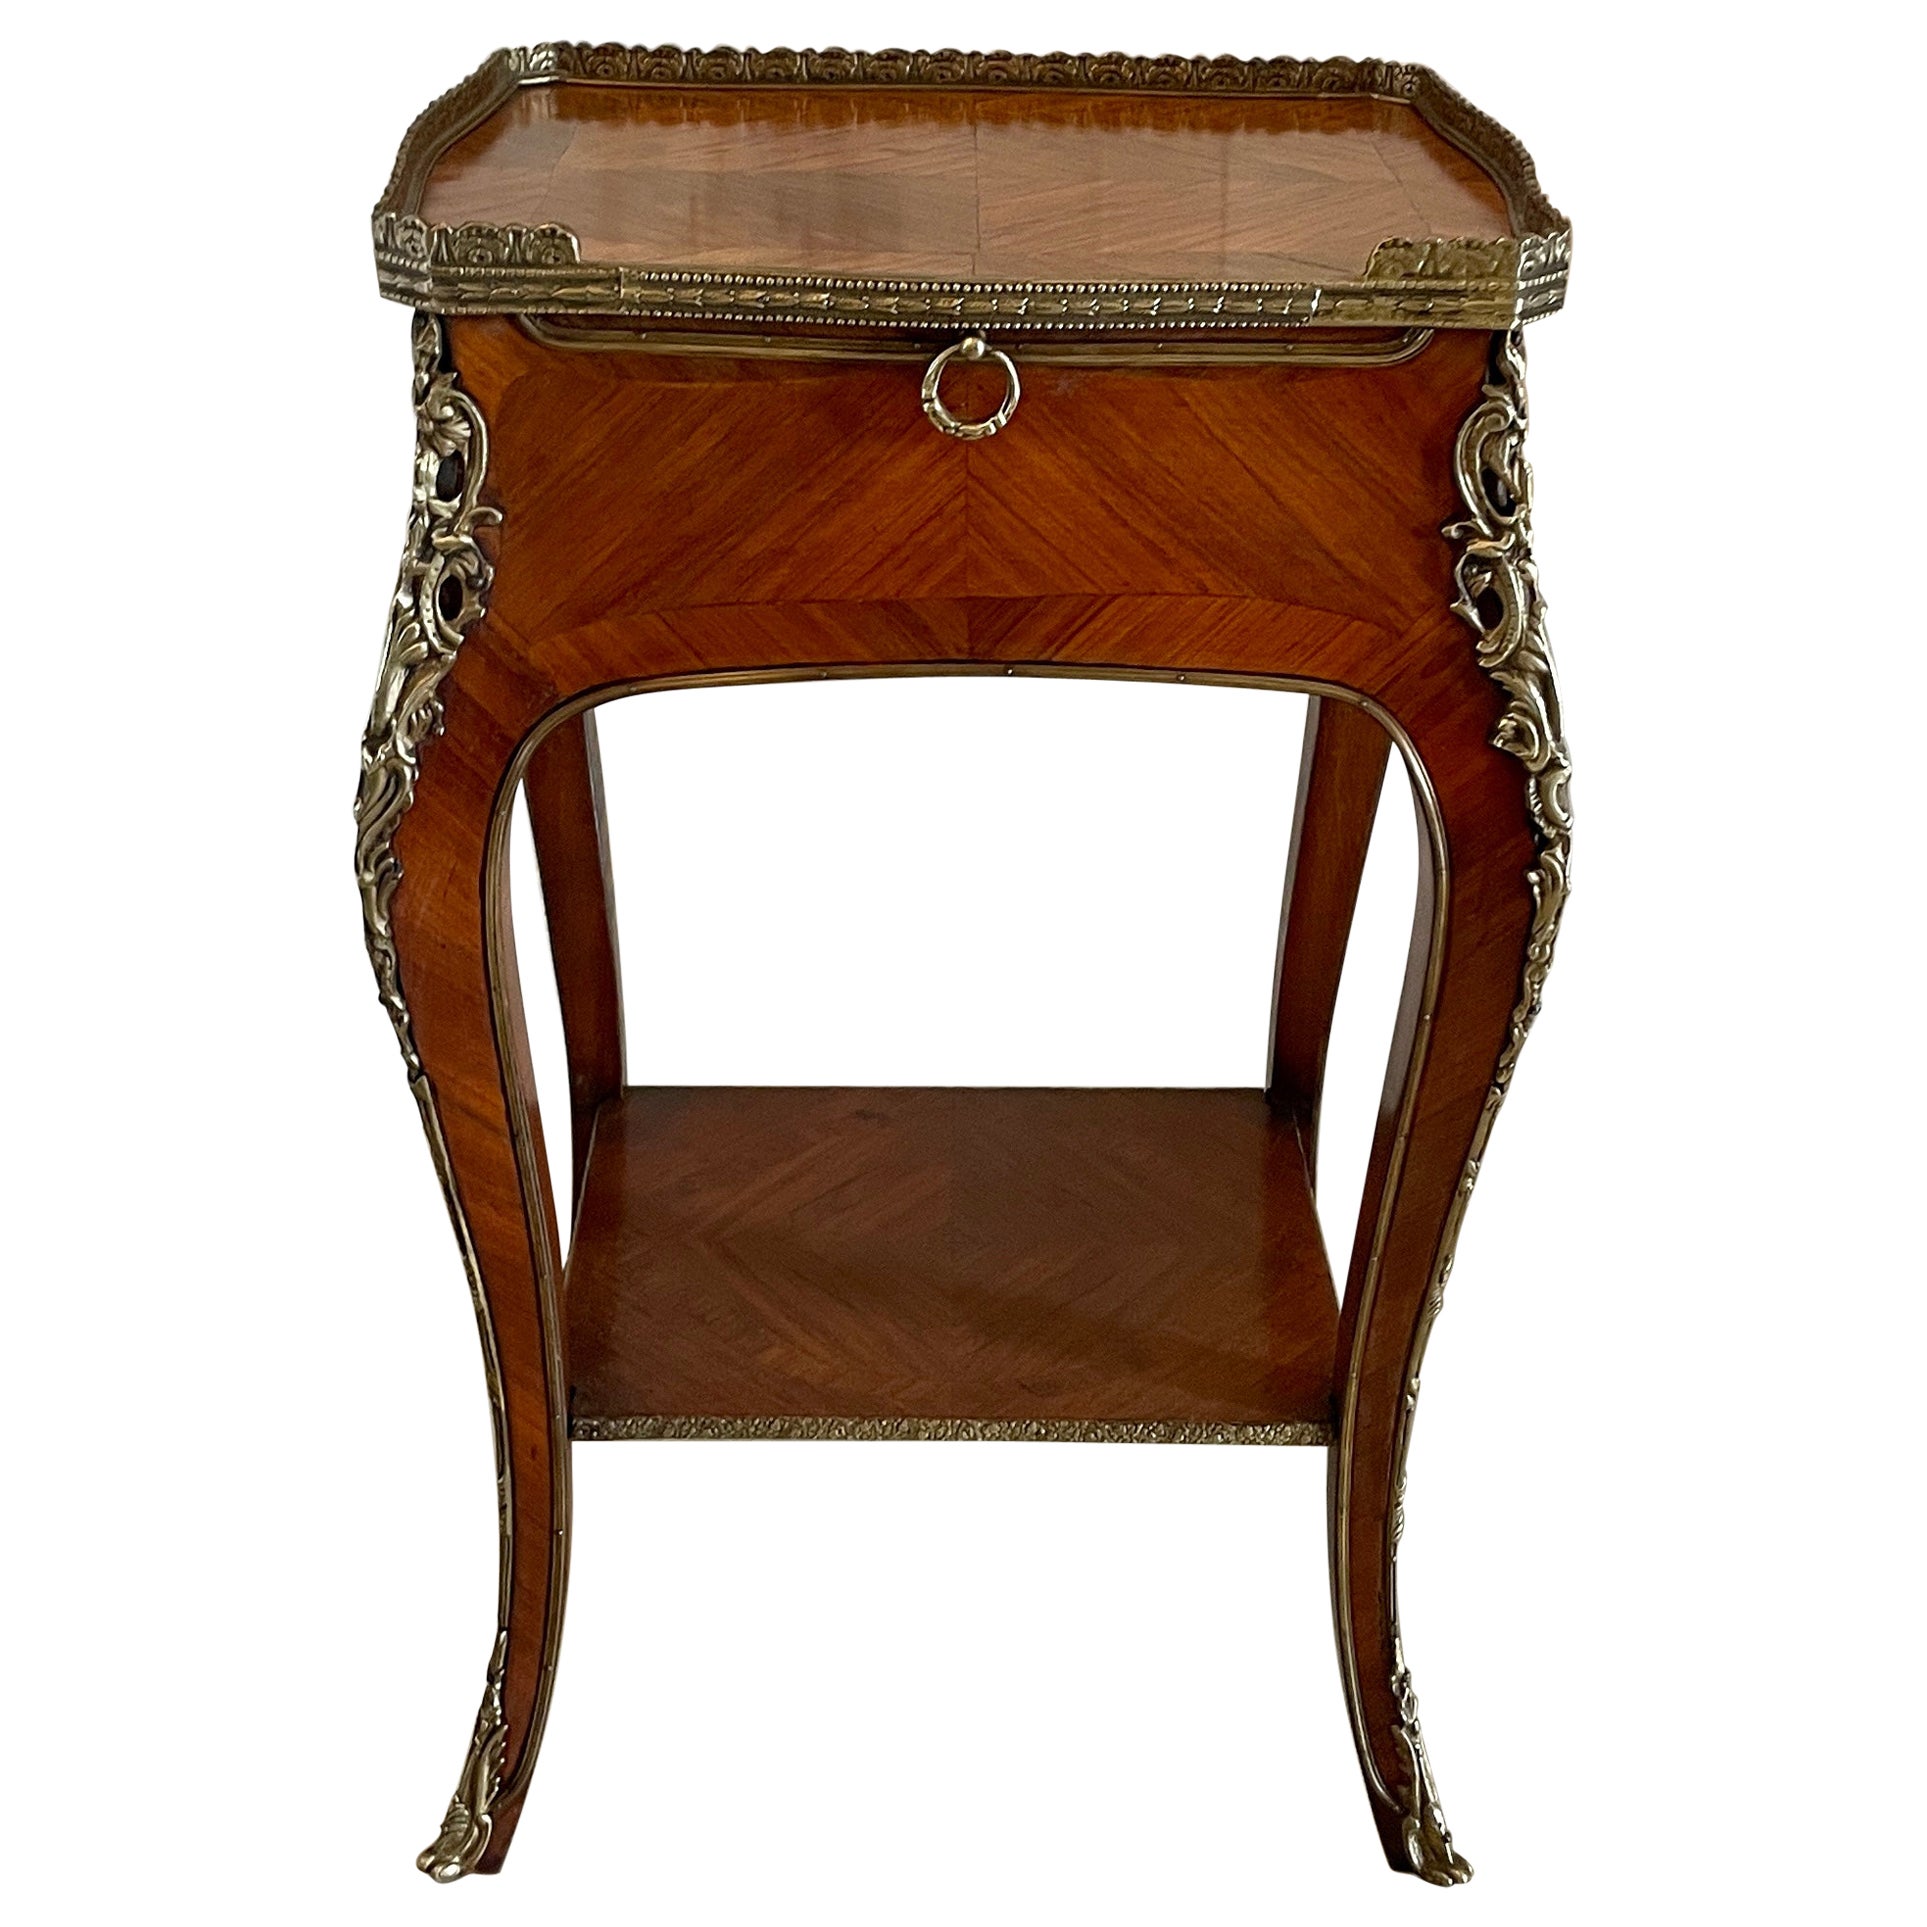 Fine Quality Antique Freestanding French Kingwood and Ormolu Mounted Lamp Table For Sale